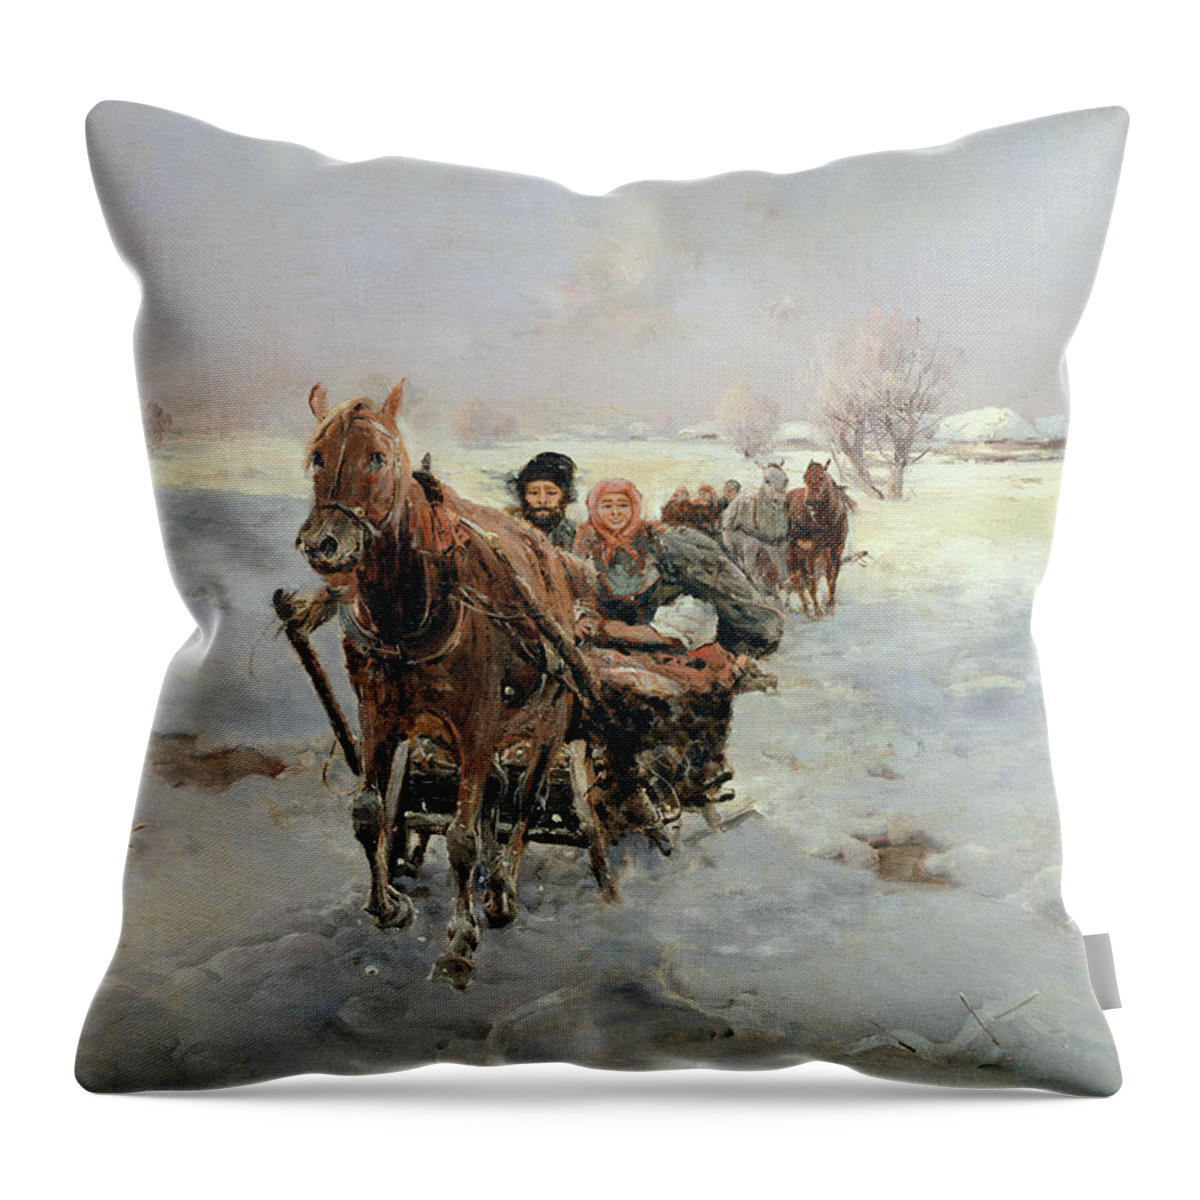 Sleighs Throw Pillow featuring the painting Sleighs in a Winter Landscape by Janina Konarsky